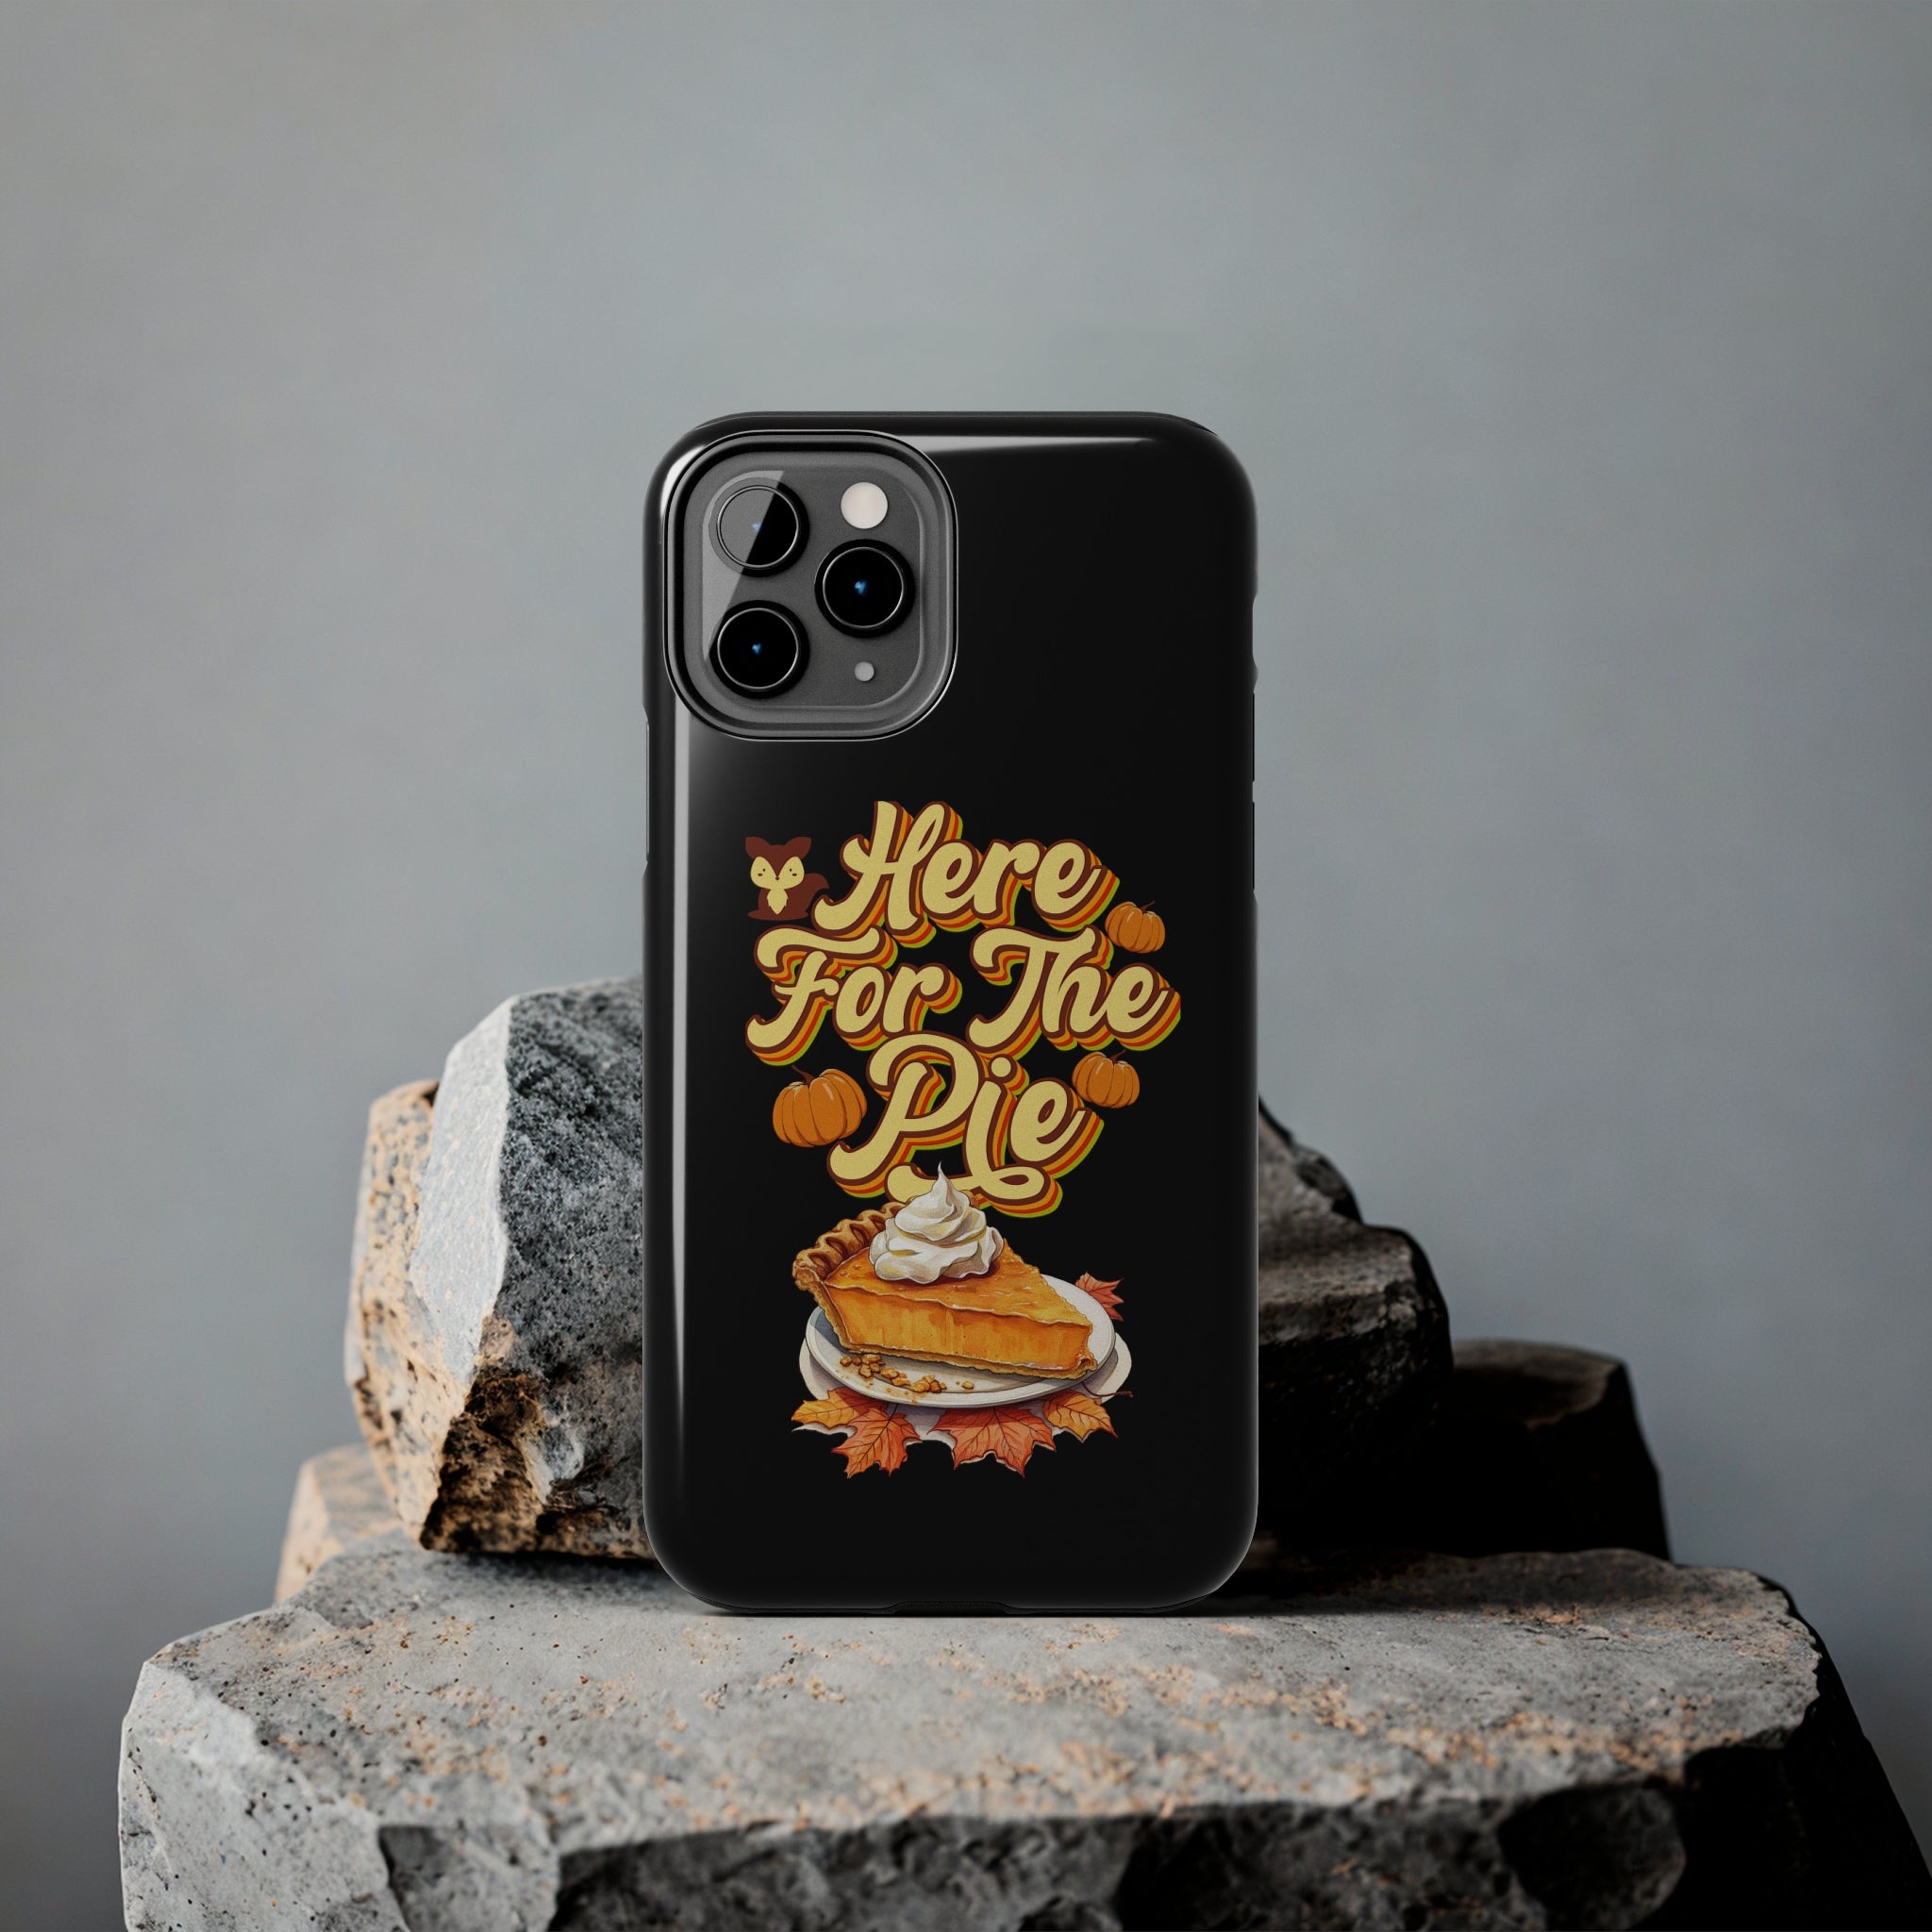 Here for Pie - Tough iPhone Cases - 21 Sizes